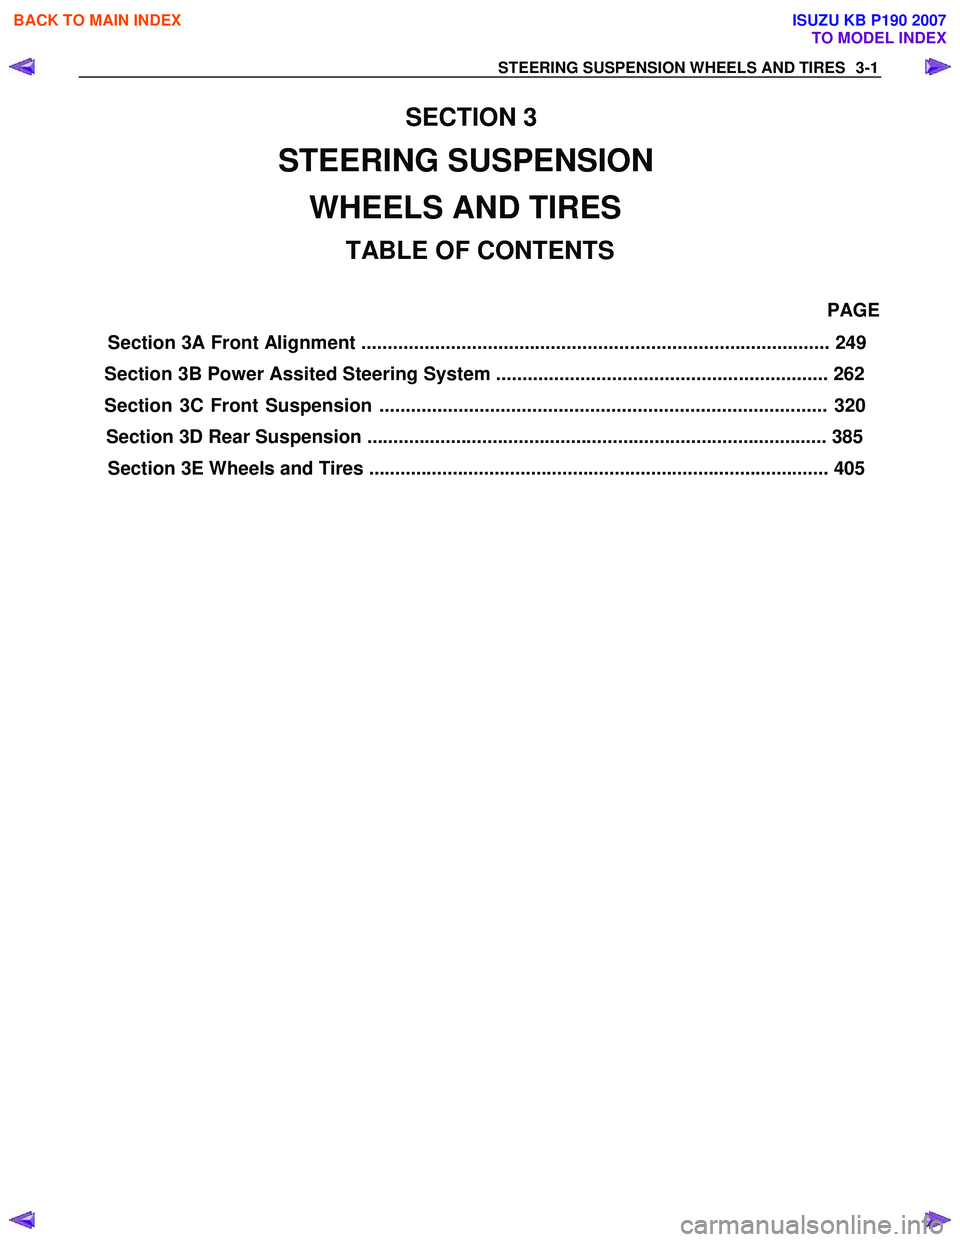 ISUZU KB P190 2007  Workshop User Guide STEERING SUSPENSION WHEELS AND TIRES 3-1  
SECTI ON 3  
STEERING SUSPENSION
TA BLE OF CONTENTS 
Section 3A  Front A lignment  ................................................... ......................